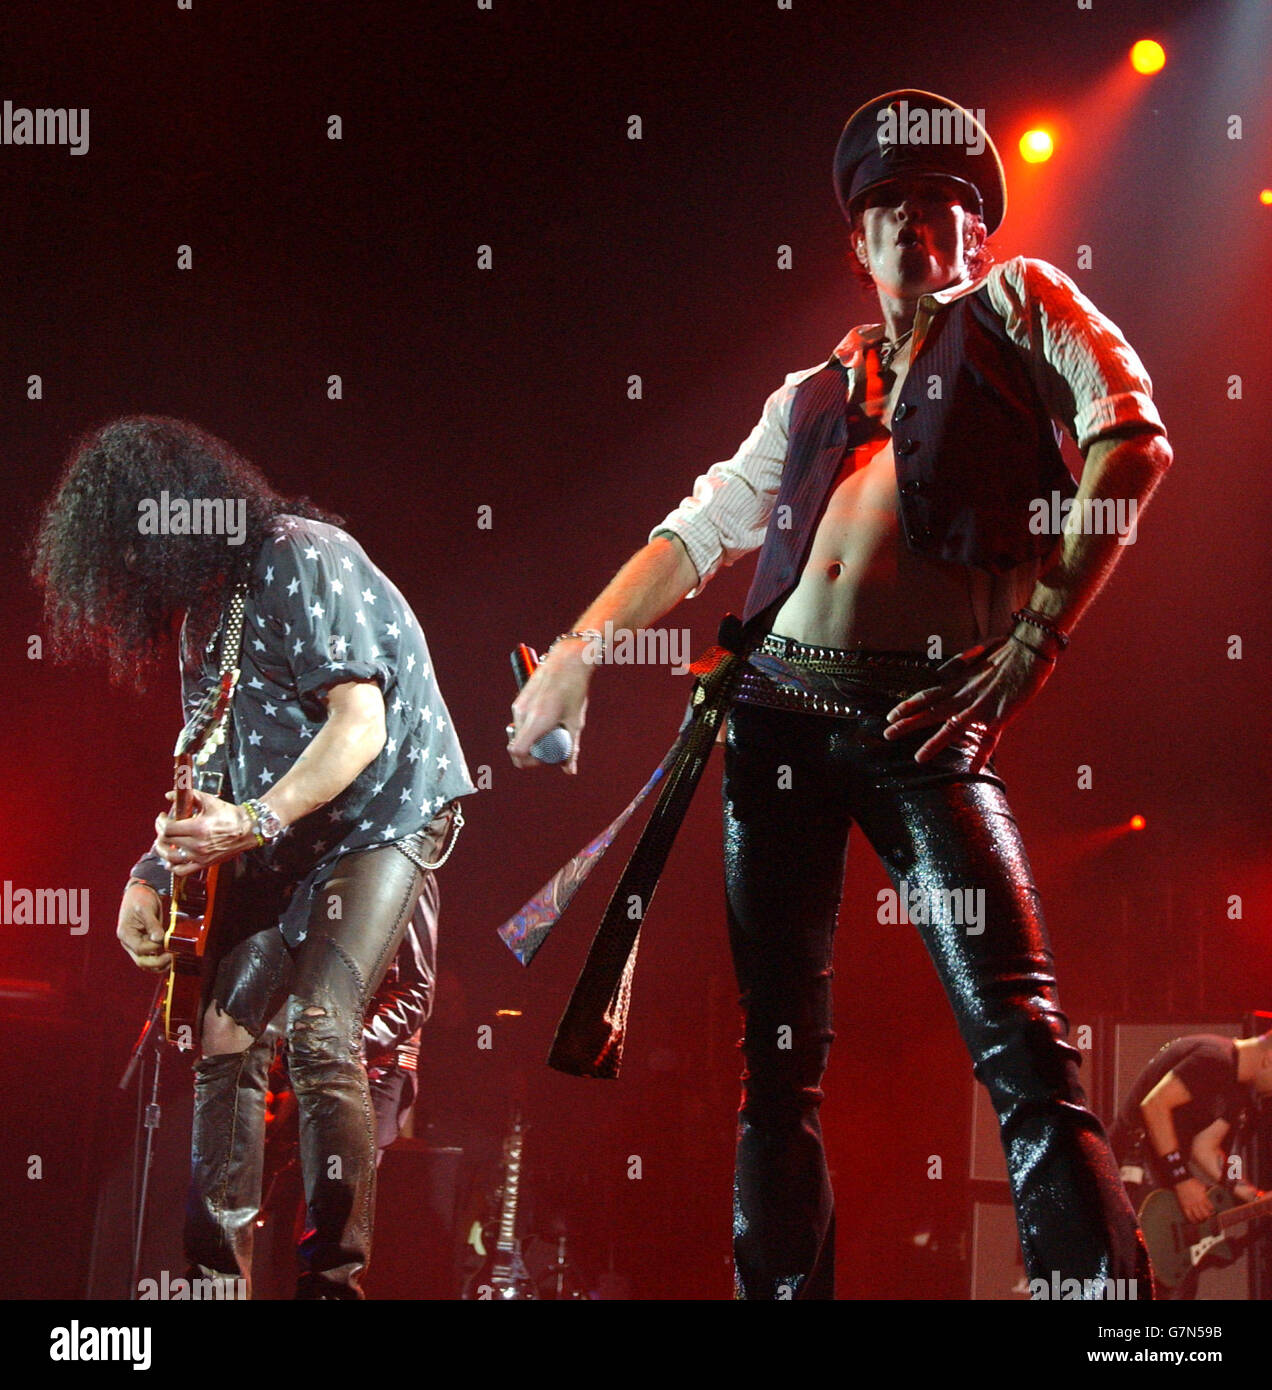 Scott Weiland (right) and Slash of Velvet Revolver perform live on stage. Stock Photo